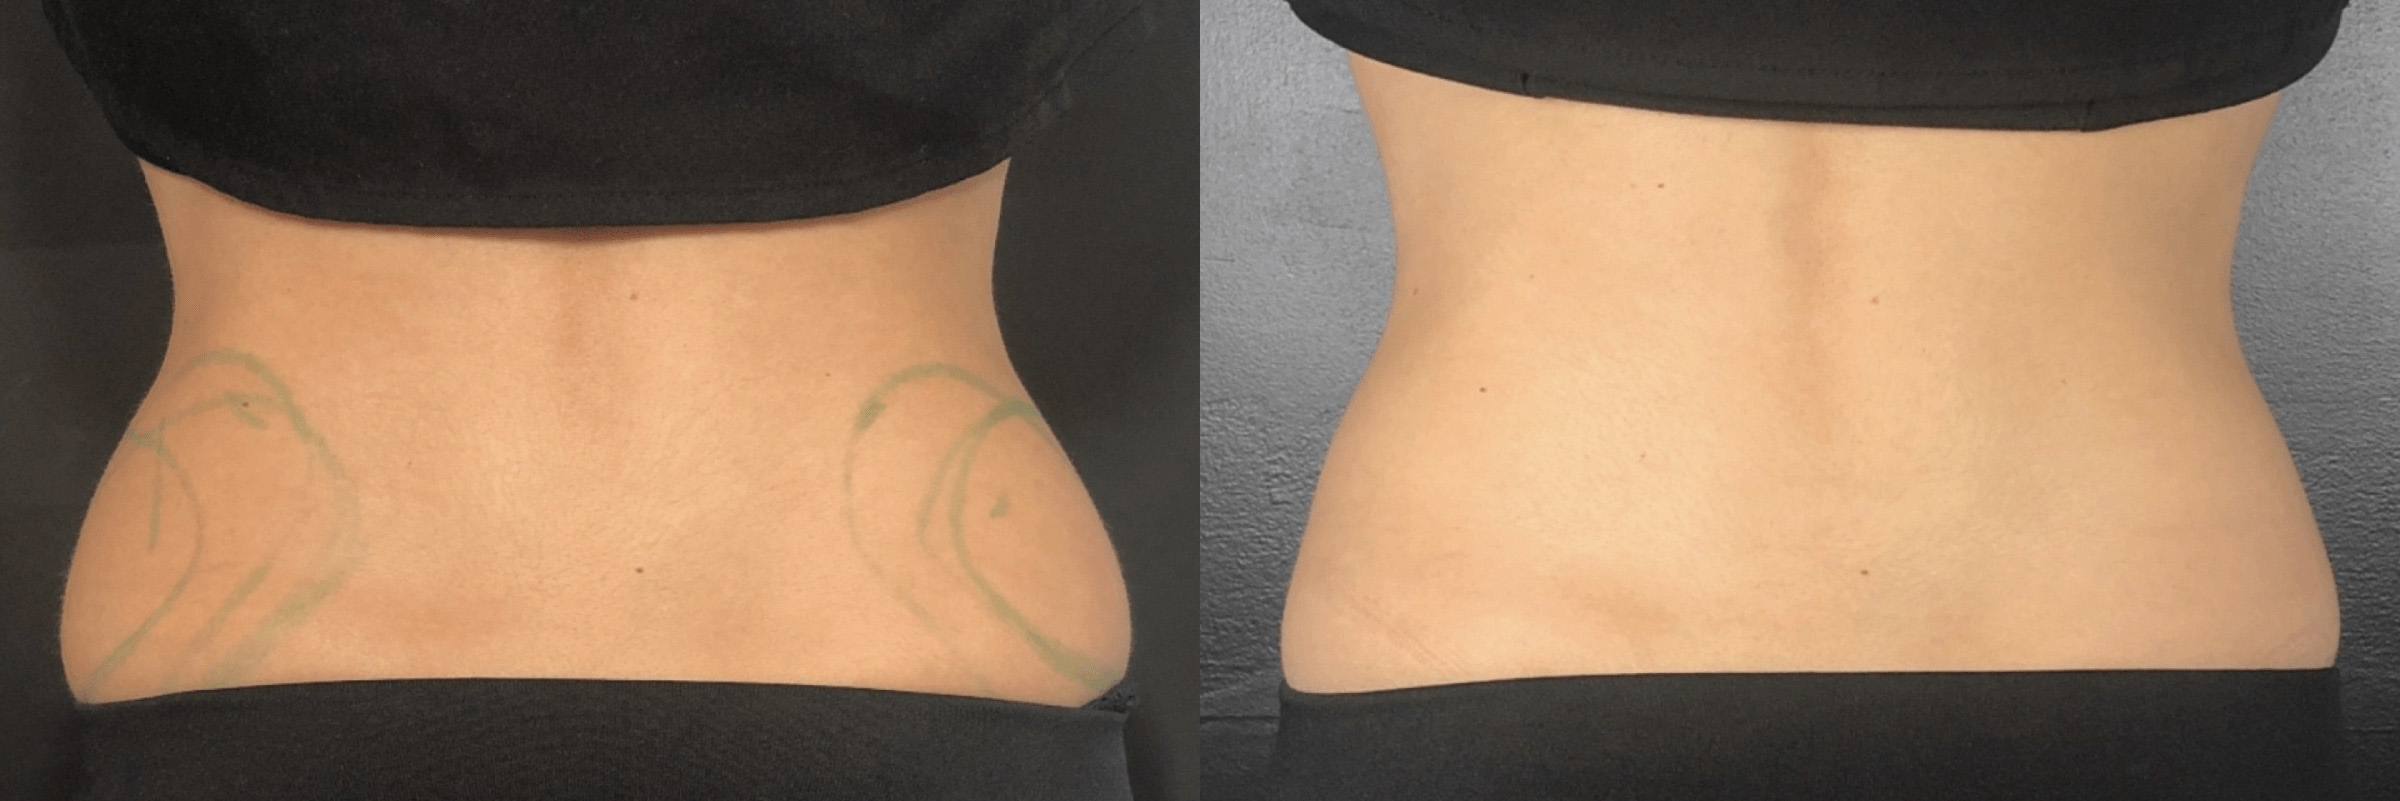 CoolSculpting Before and After Photo by Dr. Frank in New York, NY